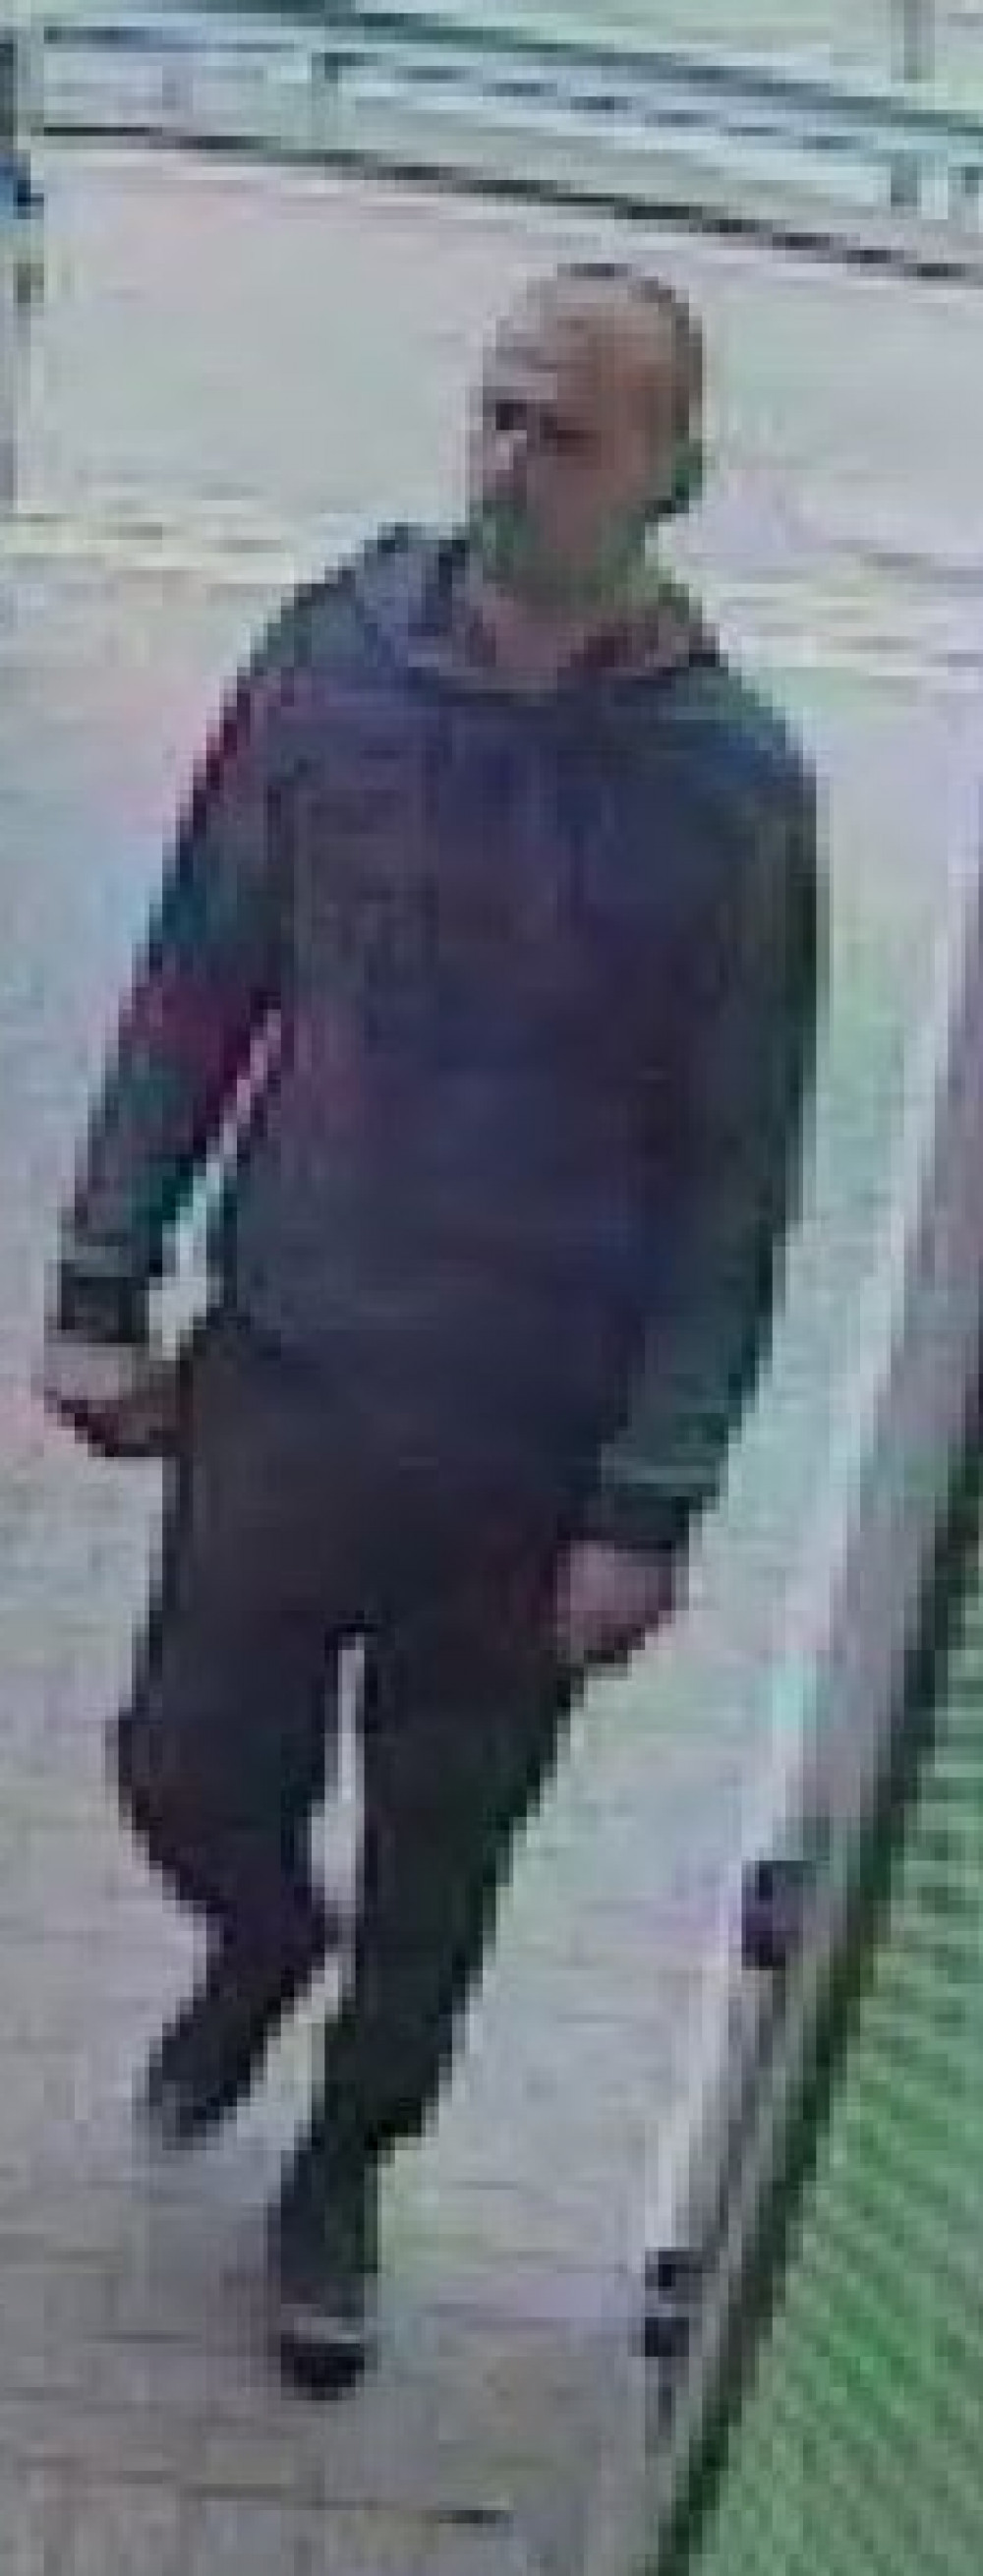 Police are appealing for information on the man pictured.